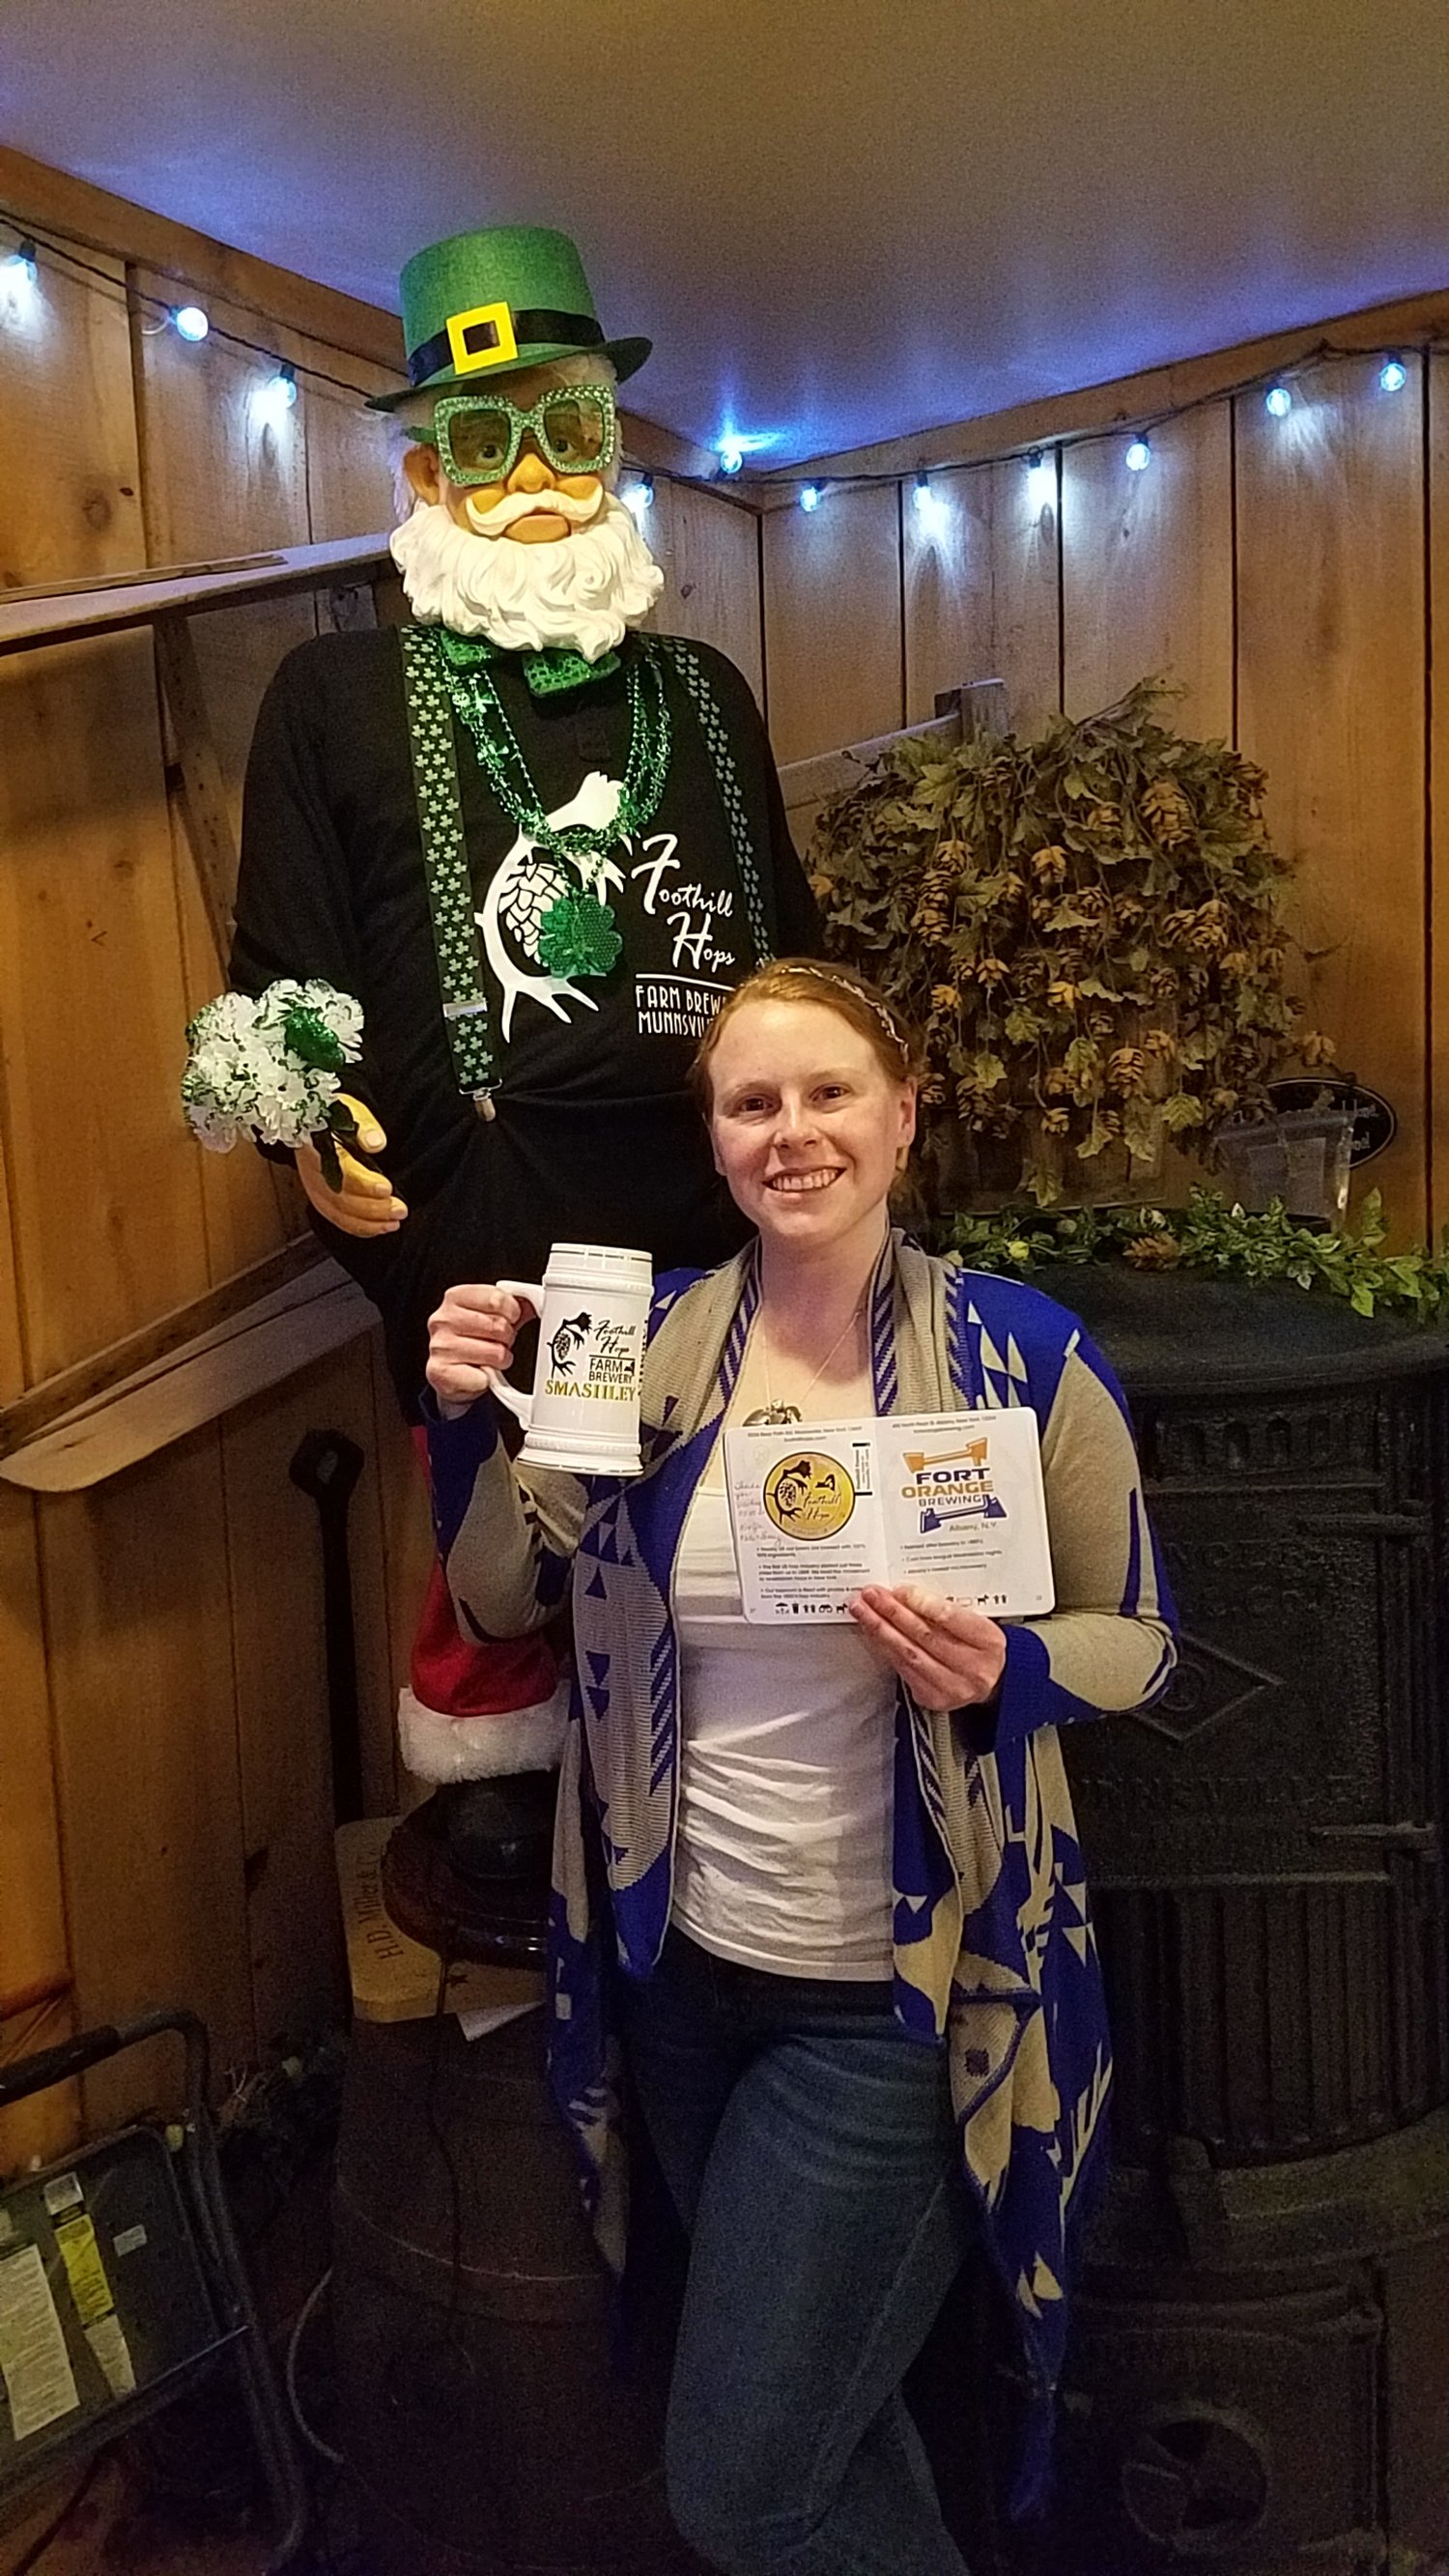 Woman posing with mug in front of animated Santa dressed as leprechaun